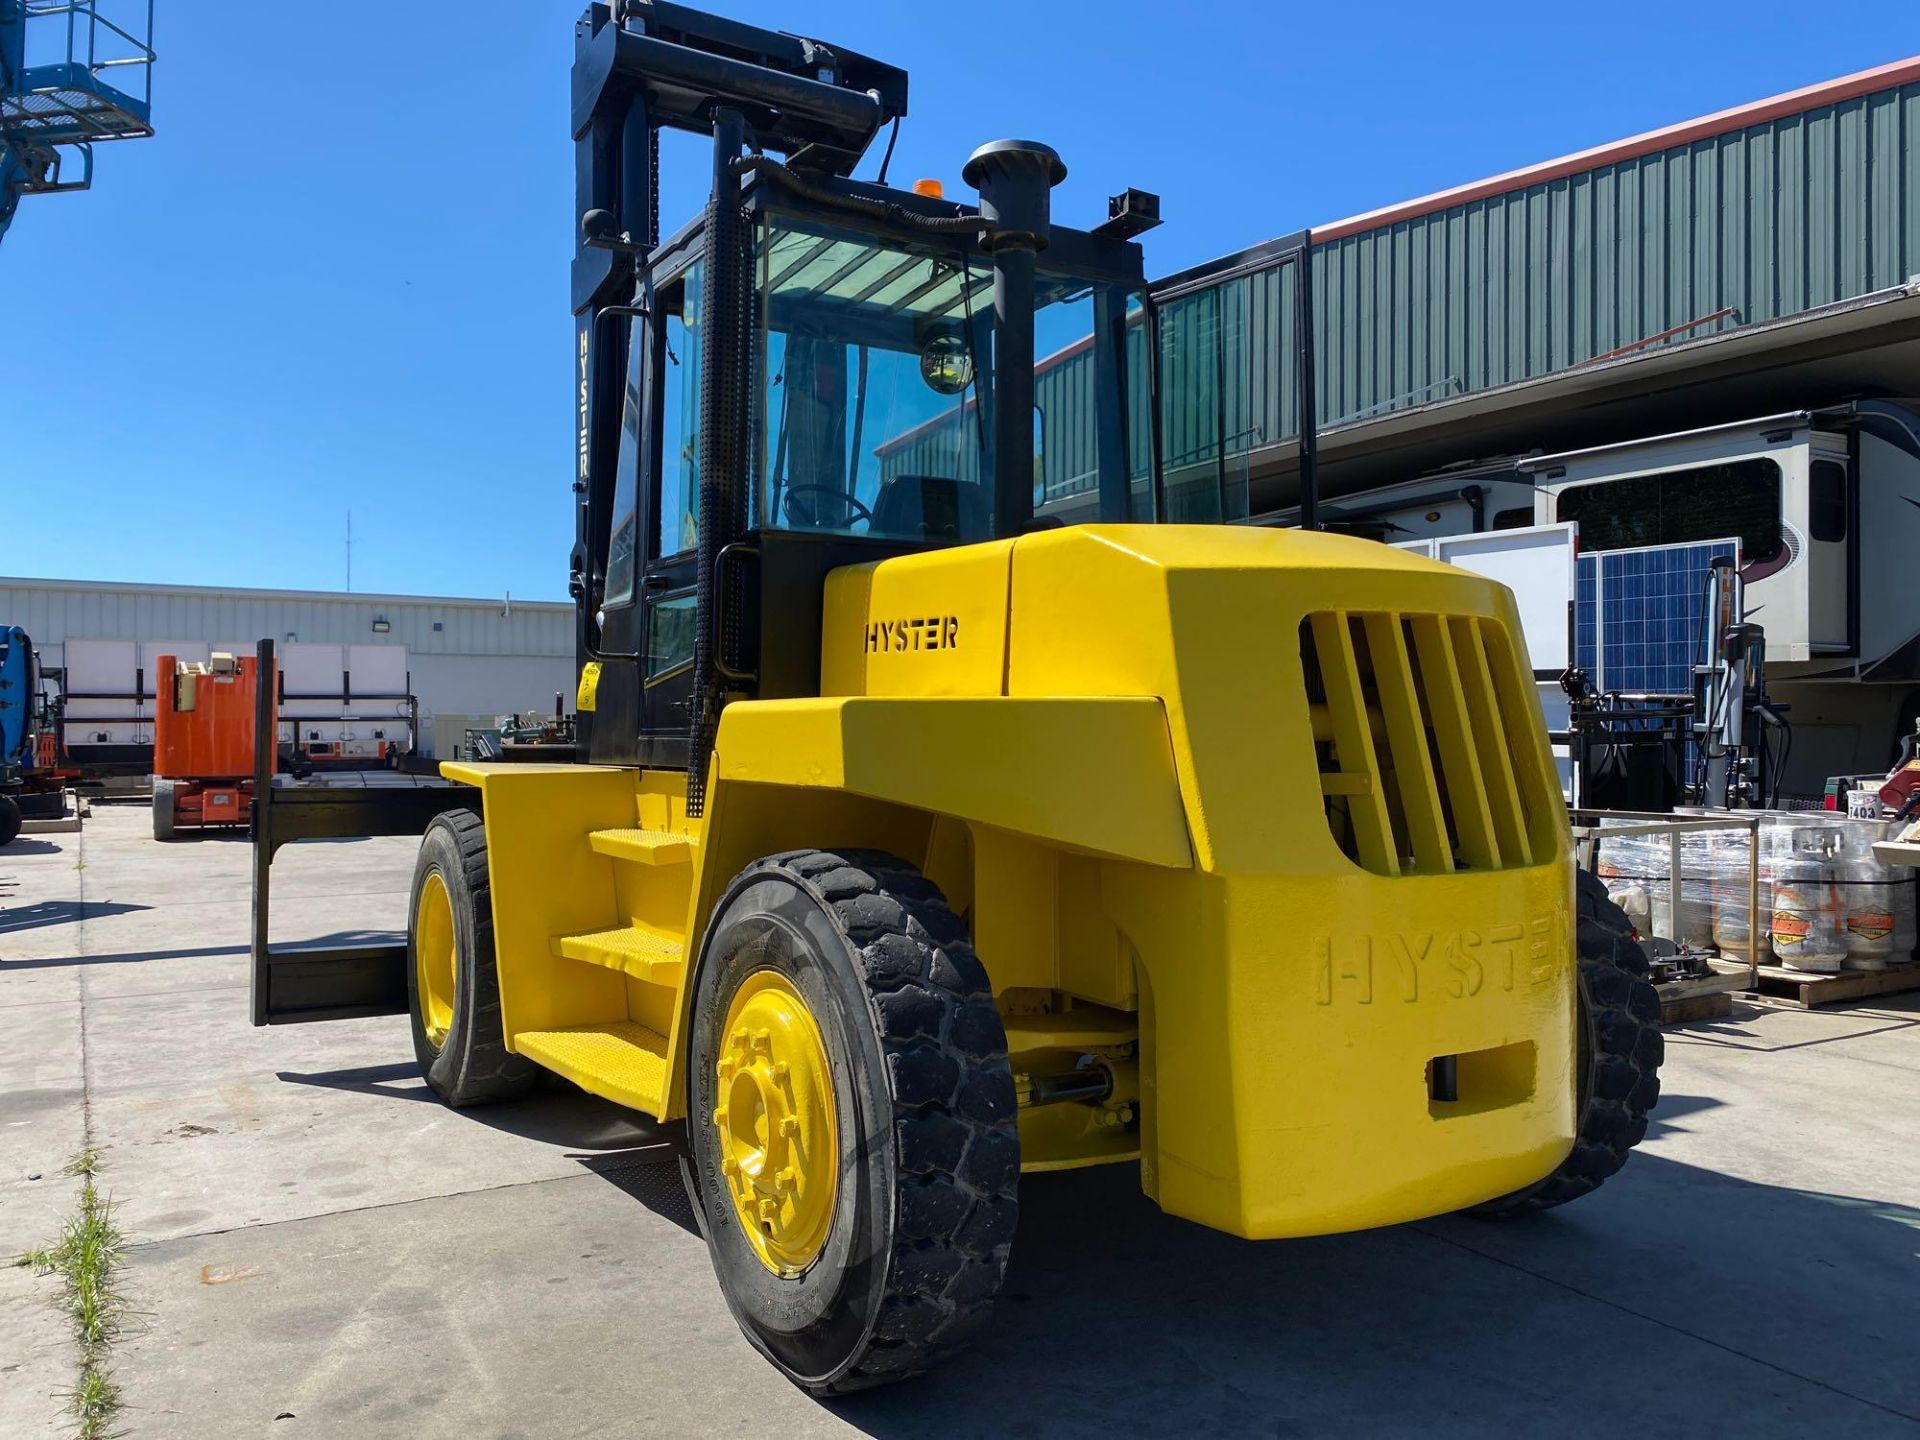 HYSTER DIESEL FORKLIFT MODEL H190XL2, APPROX. 19,000 LB CAPACITY, 212.6" HEIGHT CAPACITY, RUNS AND O - Image 3 of 12